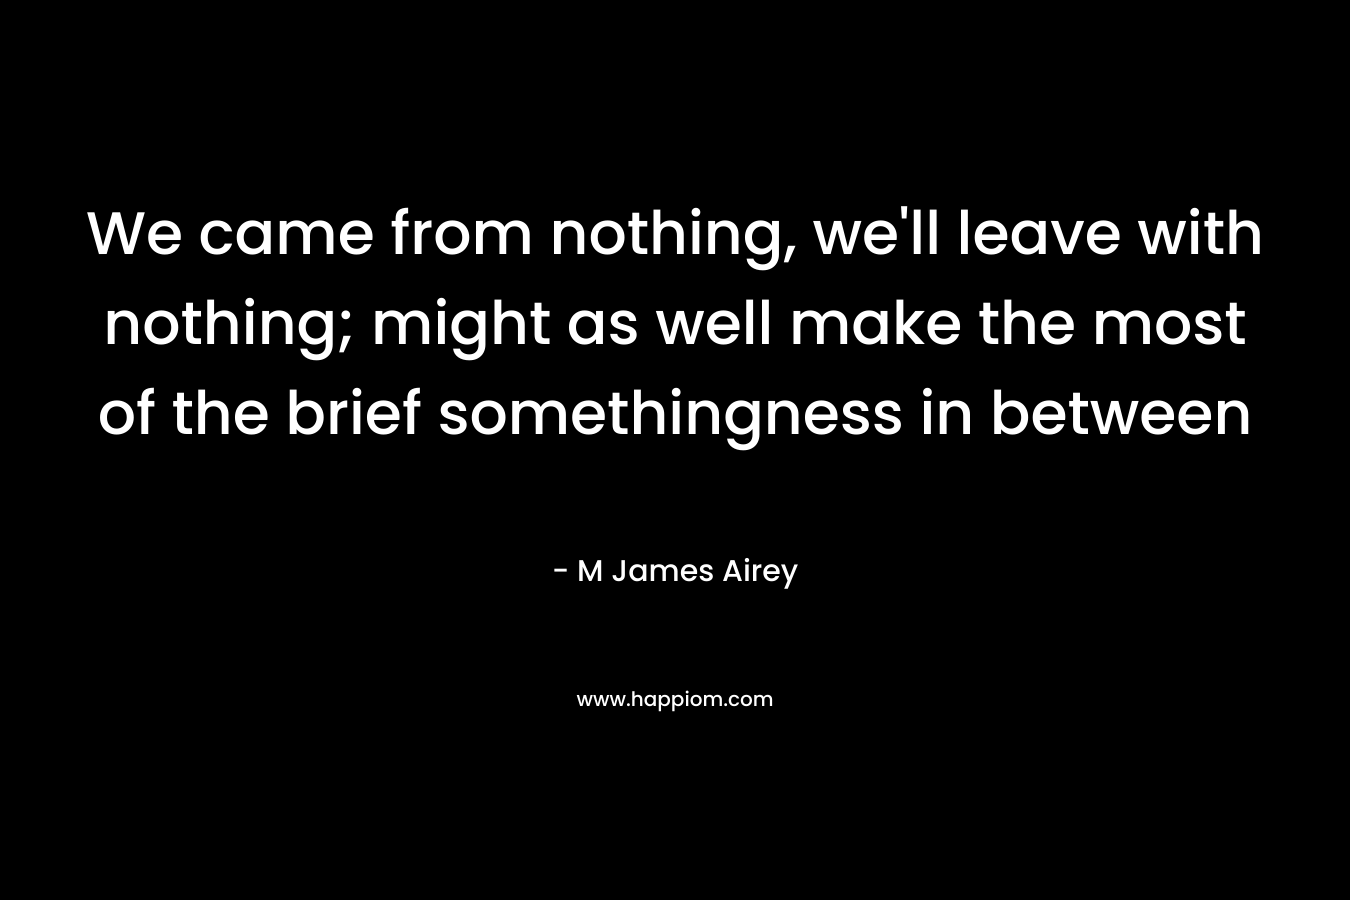 We came from nothing, we’ll leave with nothing; might as well make the most of the brief somethingness in between – M James Airey